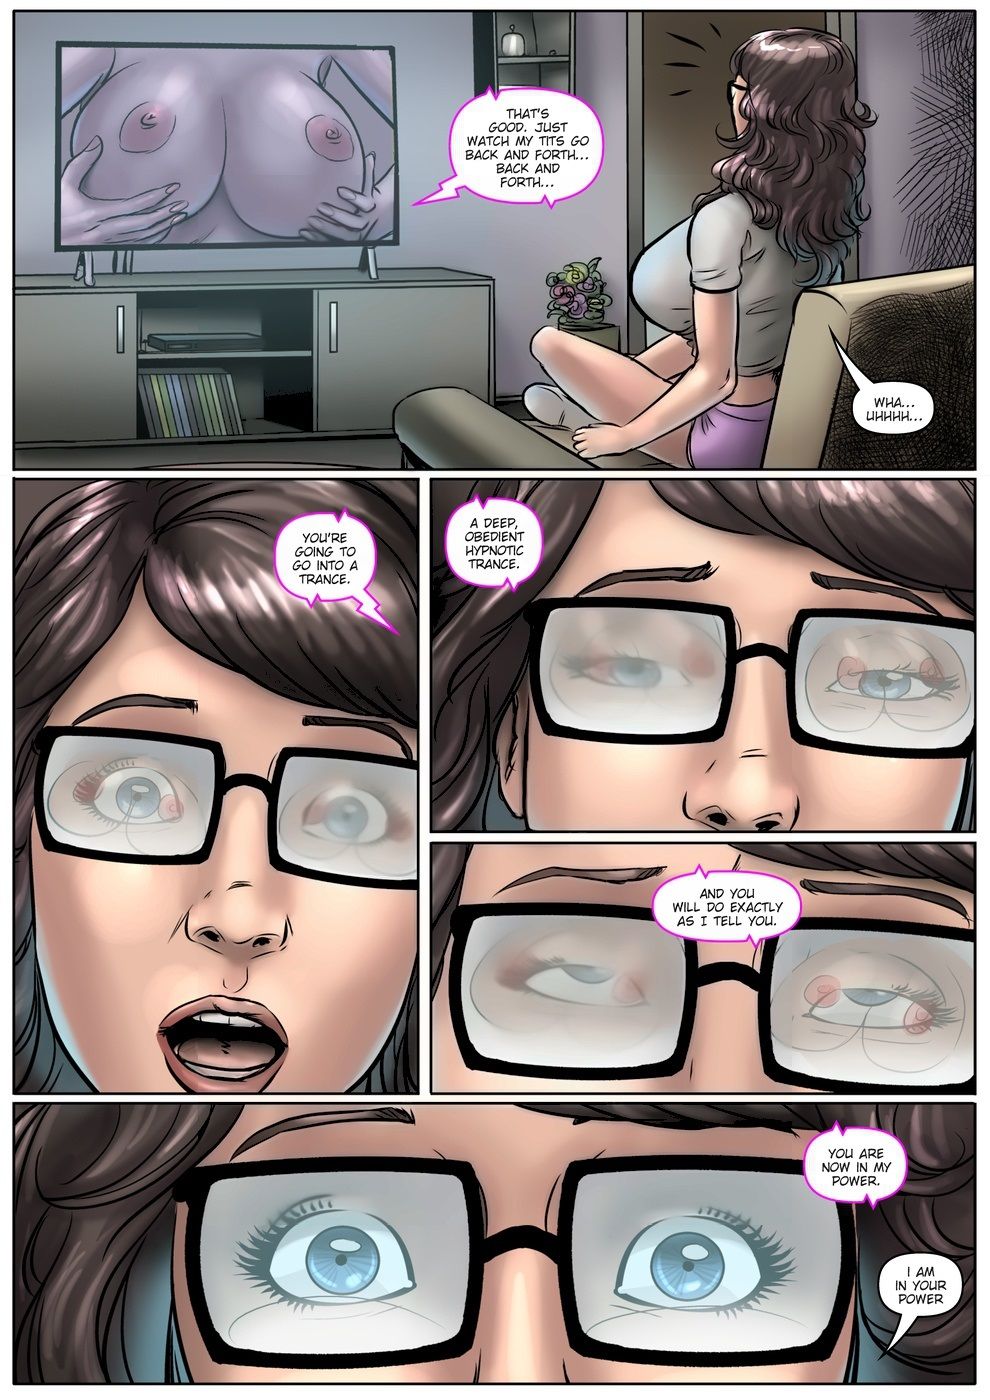 Waiting Room Issue 11 Huex Team ( Mind Control) page 12